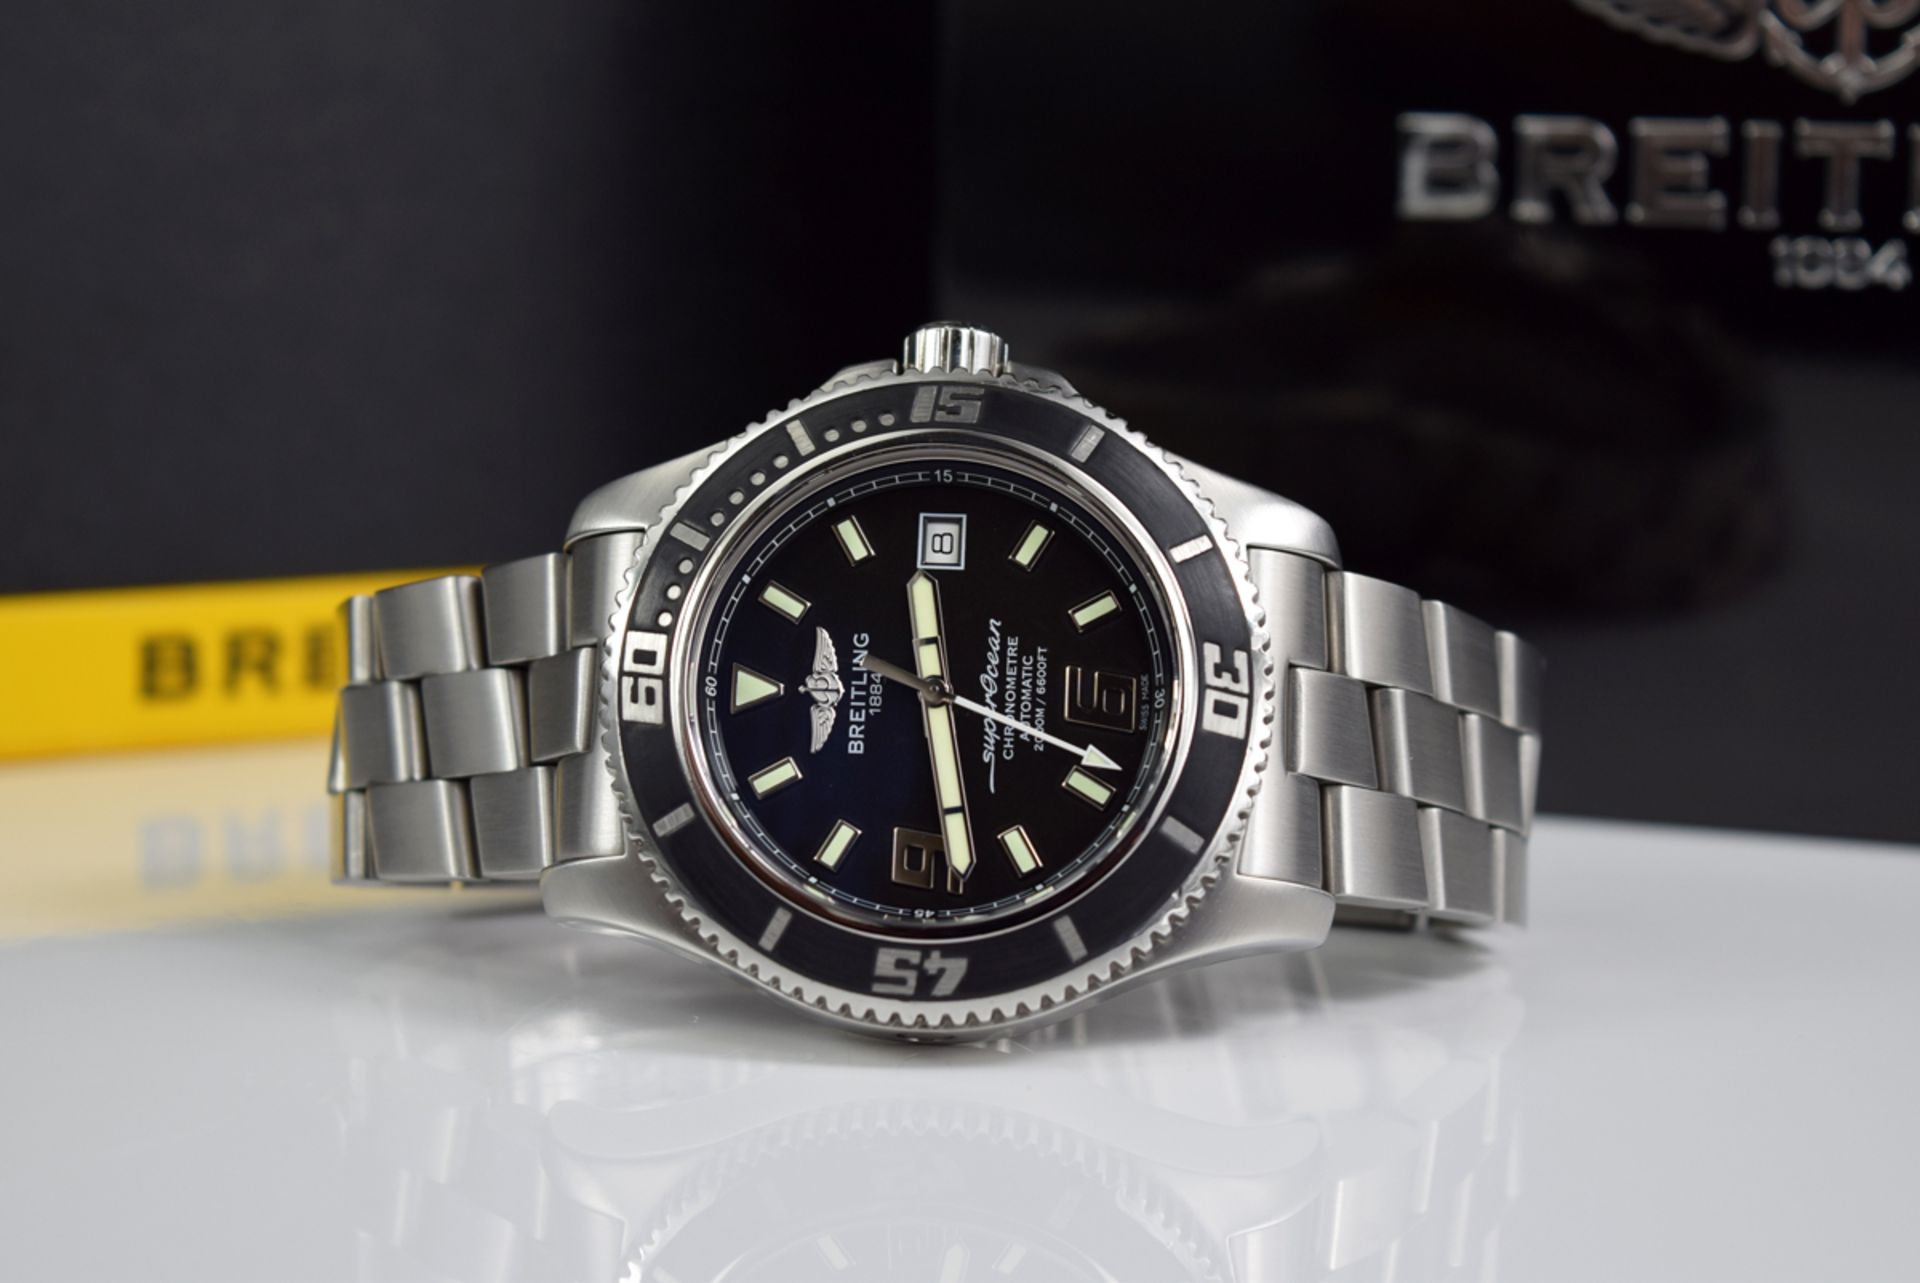 BREITLING SUPEROCEAN 44 - STEEL AUTOMATIC (A17391) - Image 9 of 9